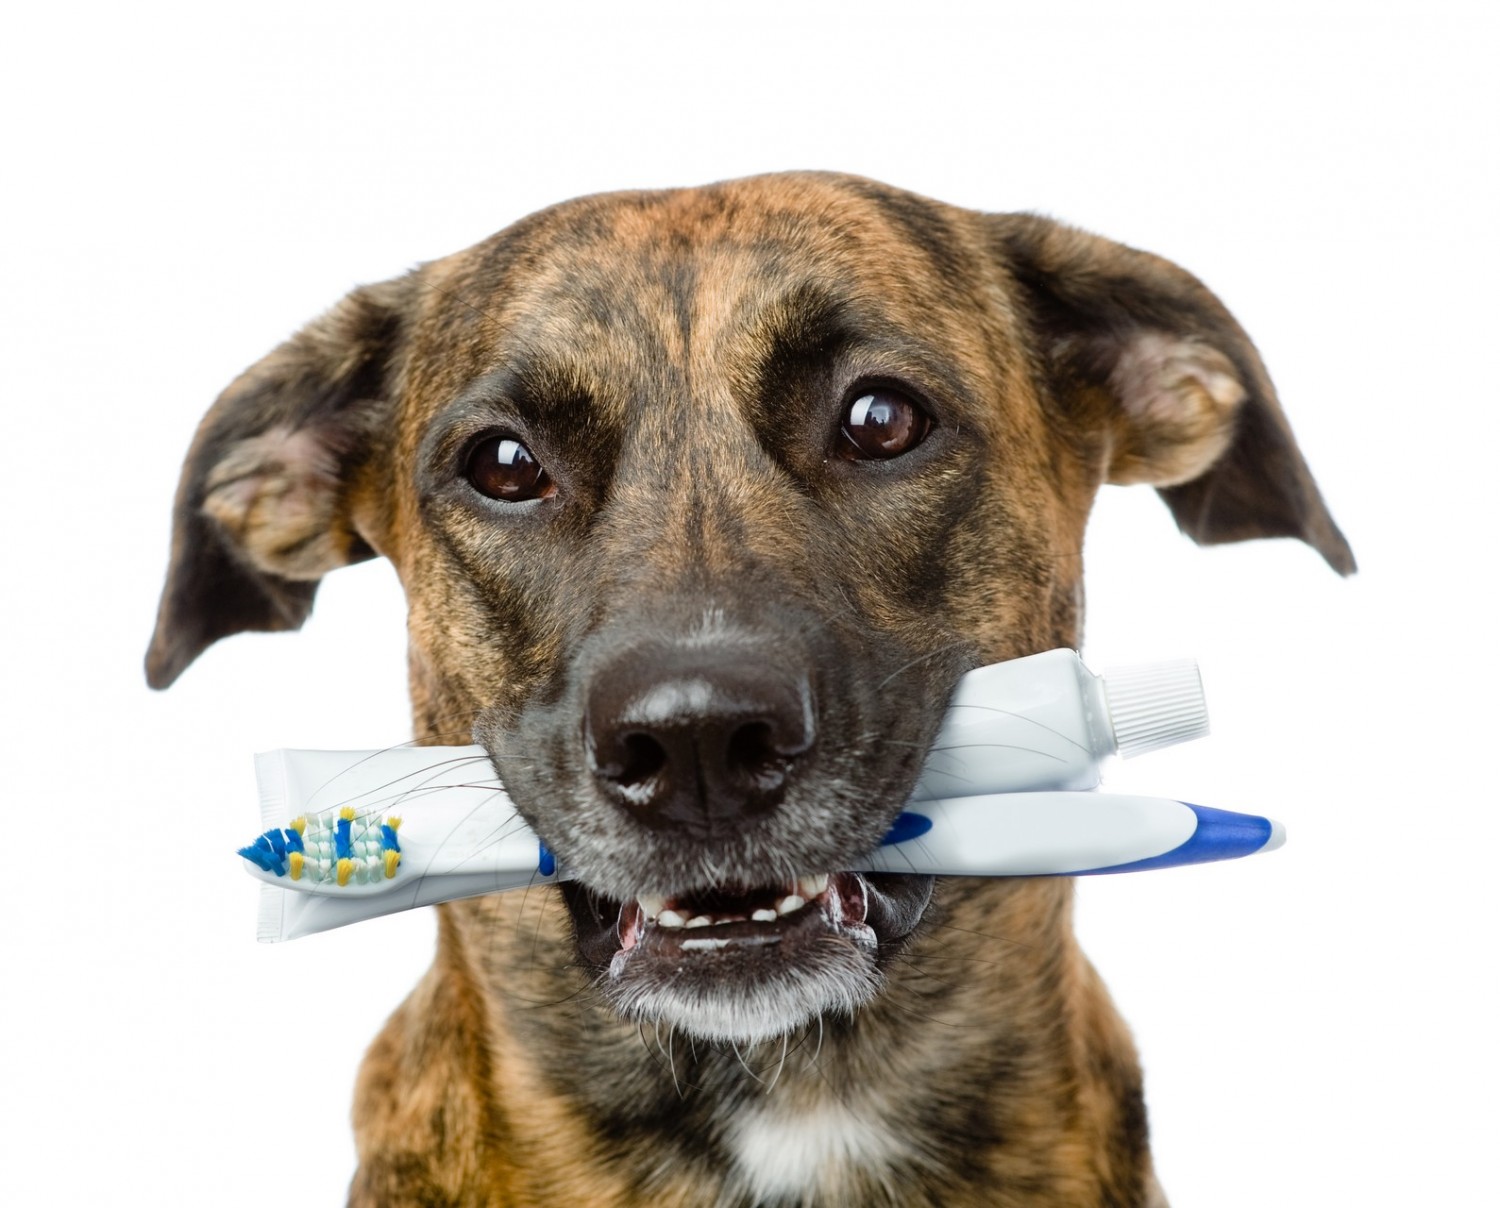 stock photo of dog with toothbrush and toothpaste